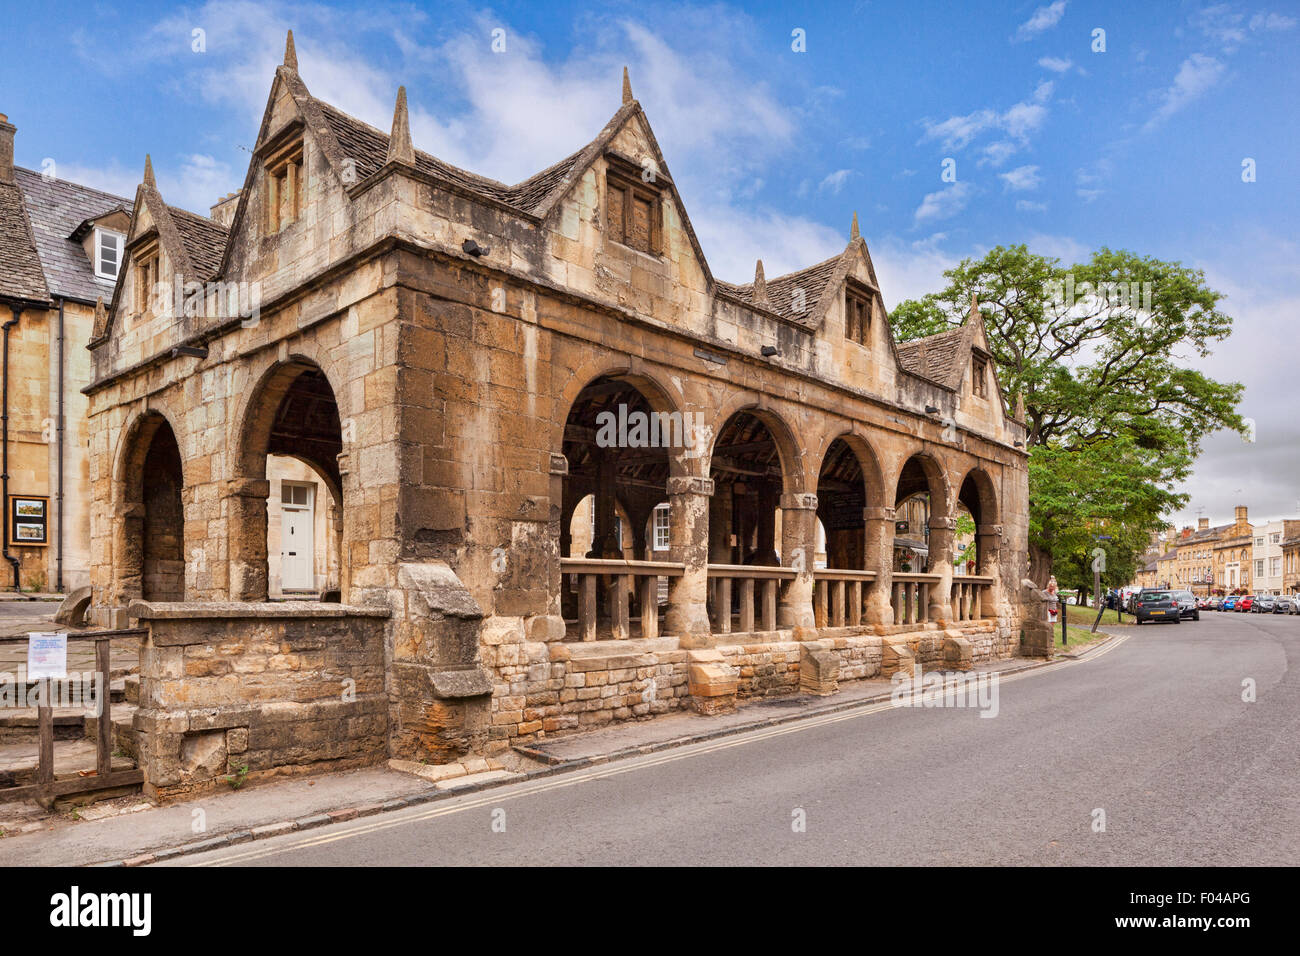 The old Market Hall, Chipping Campden, Oxfordshire, England Stock Photo